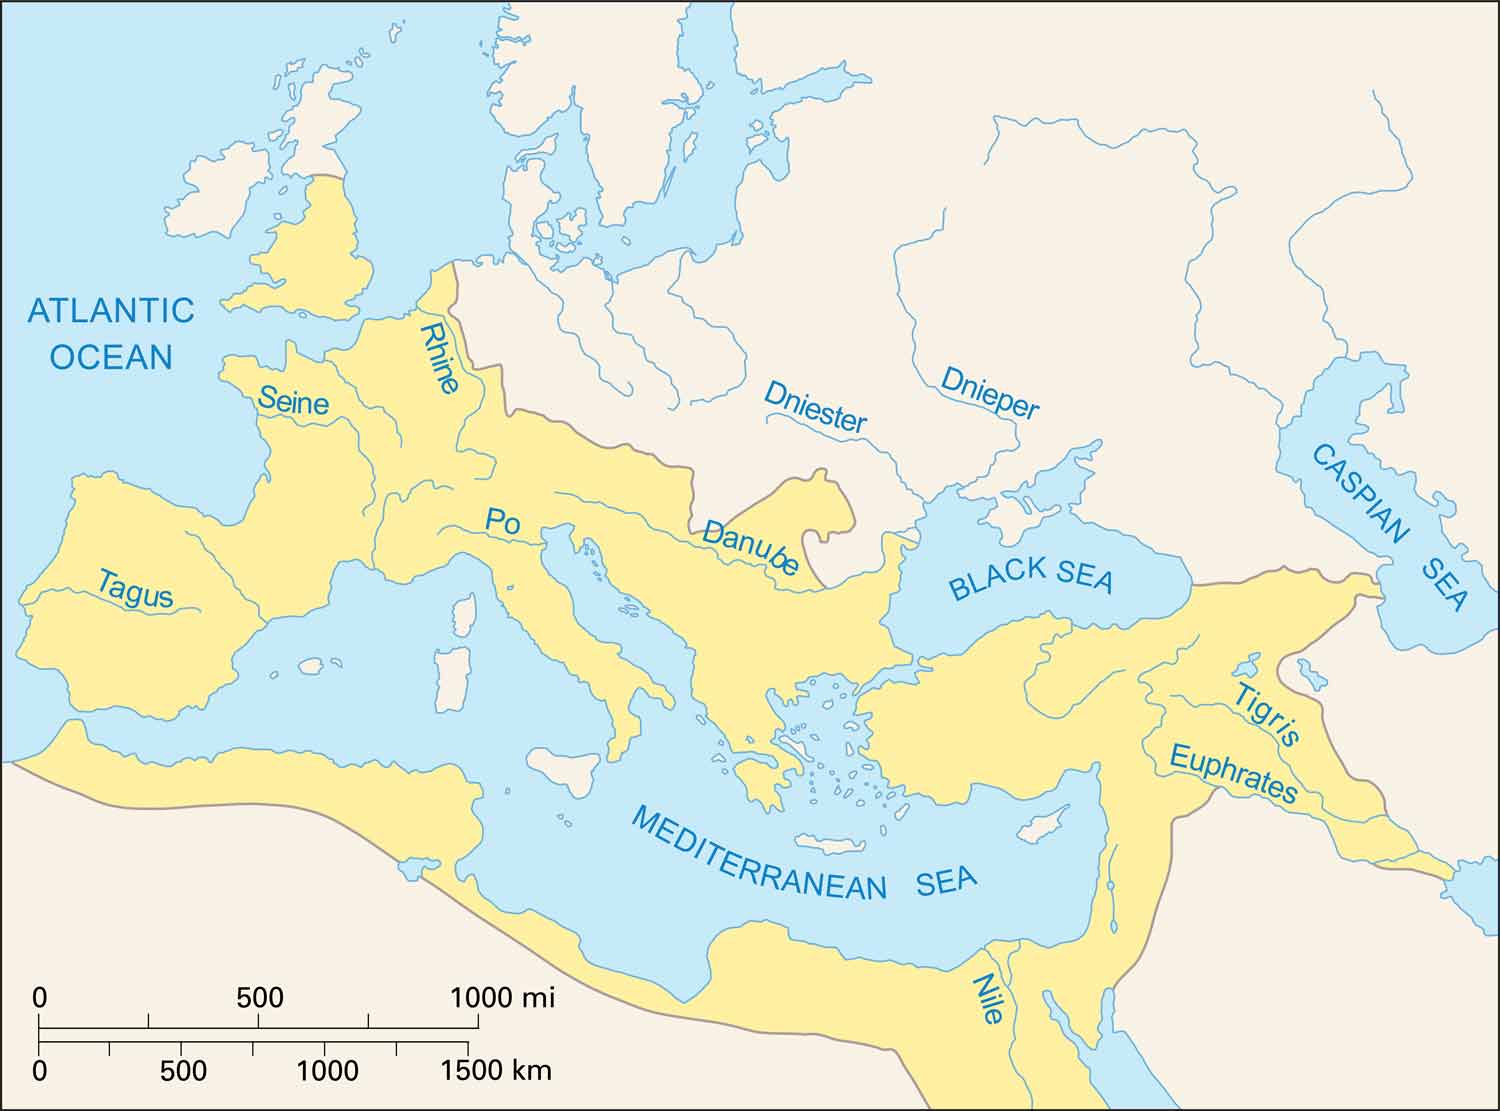 A map of Europe and northern Africa shows much of the region highlighted in yellow.